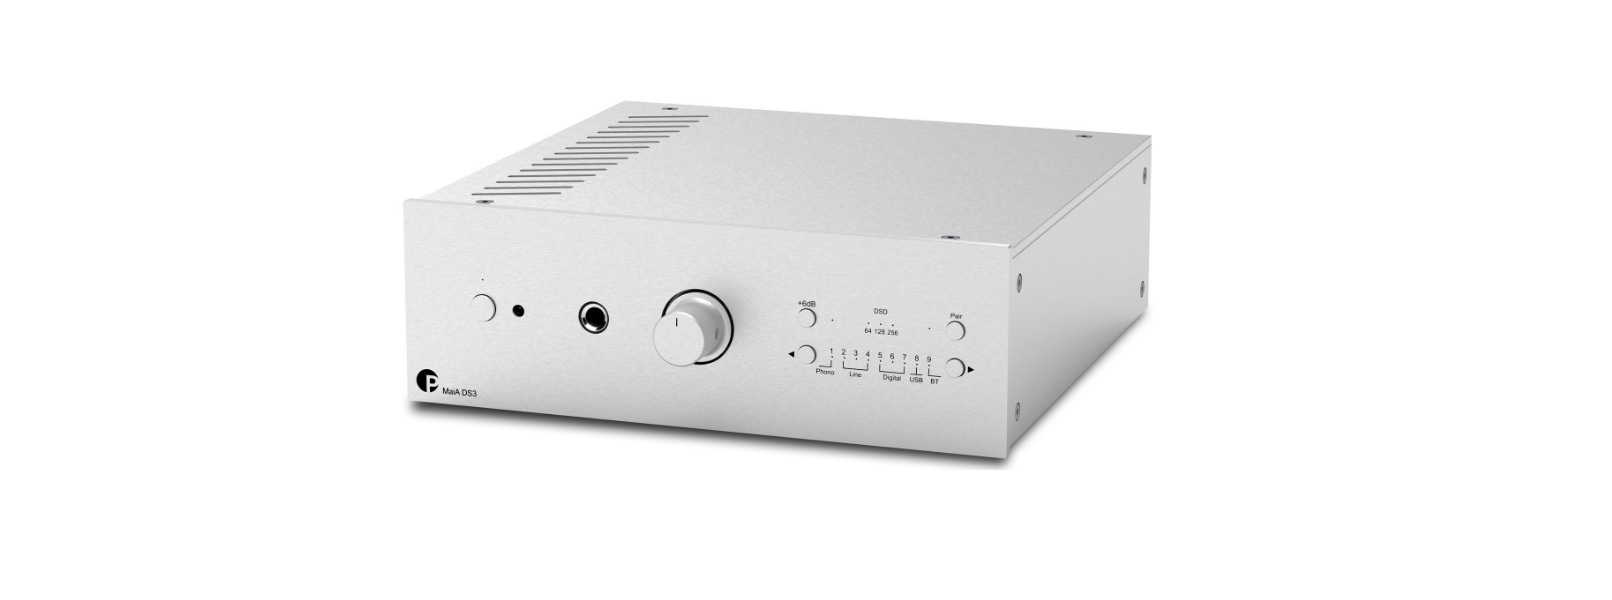 MaiA DS3 Stereo Box S3 BT Amplifiers